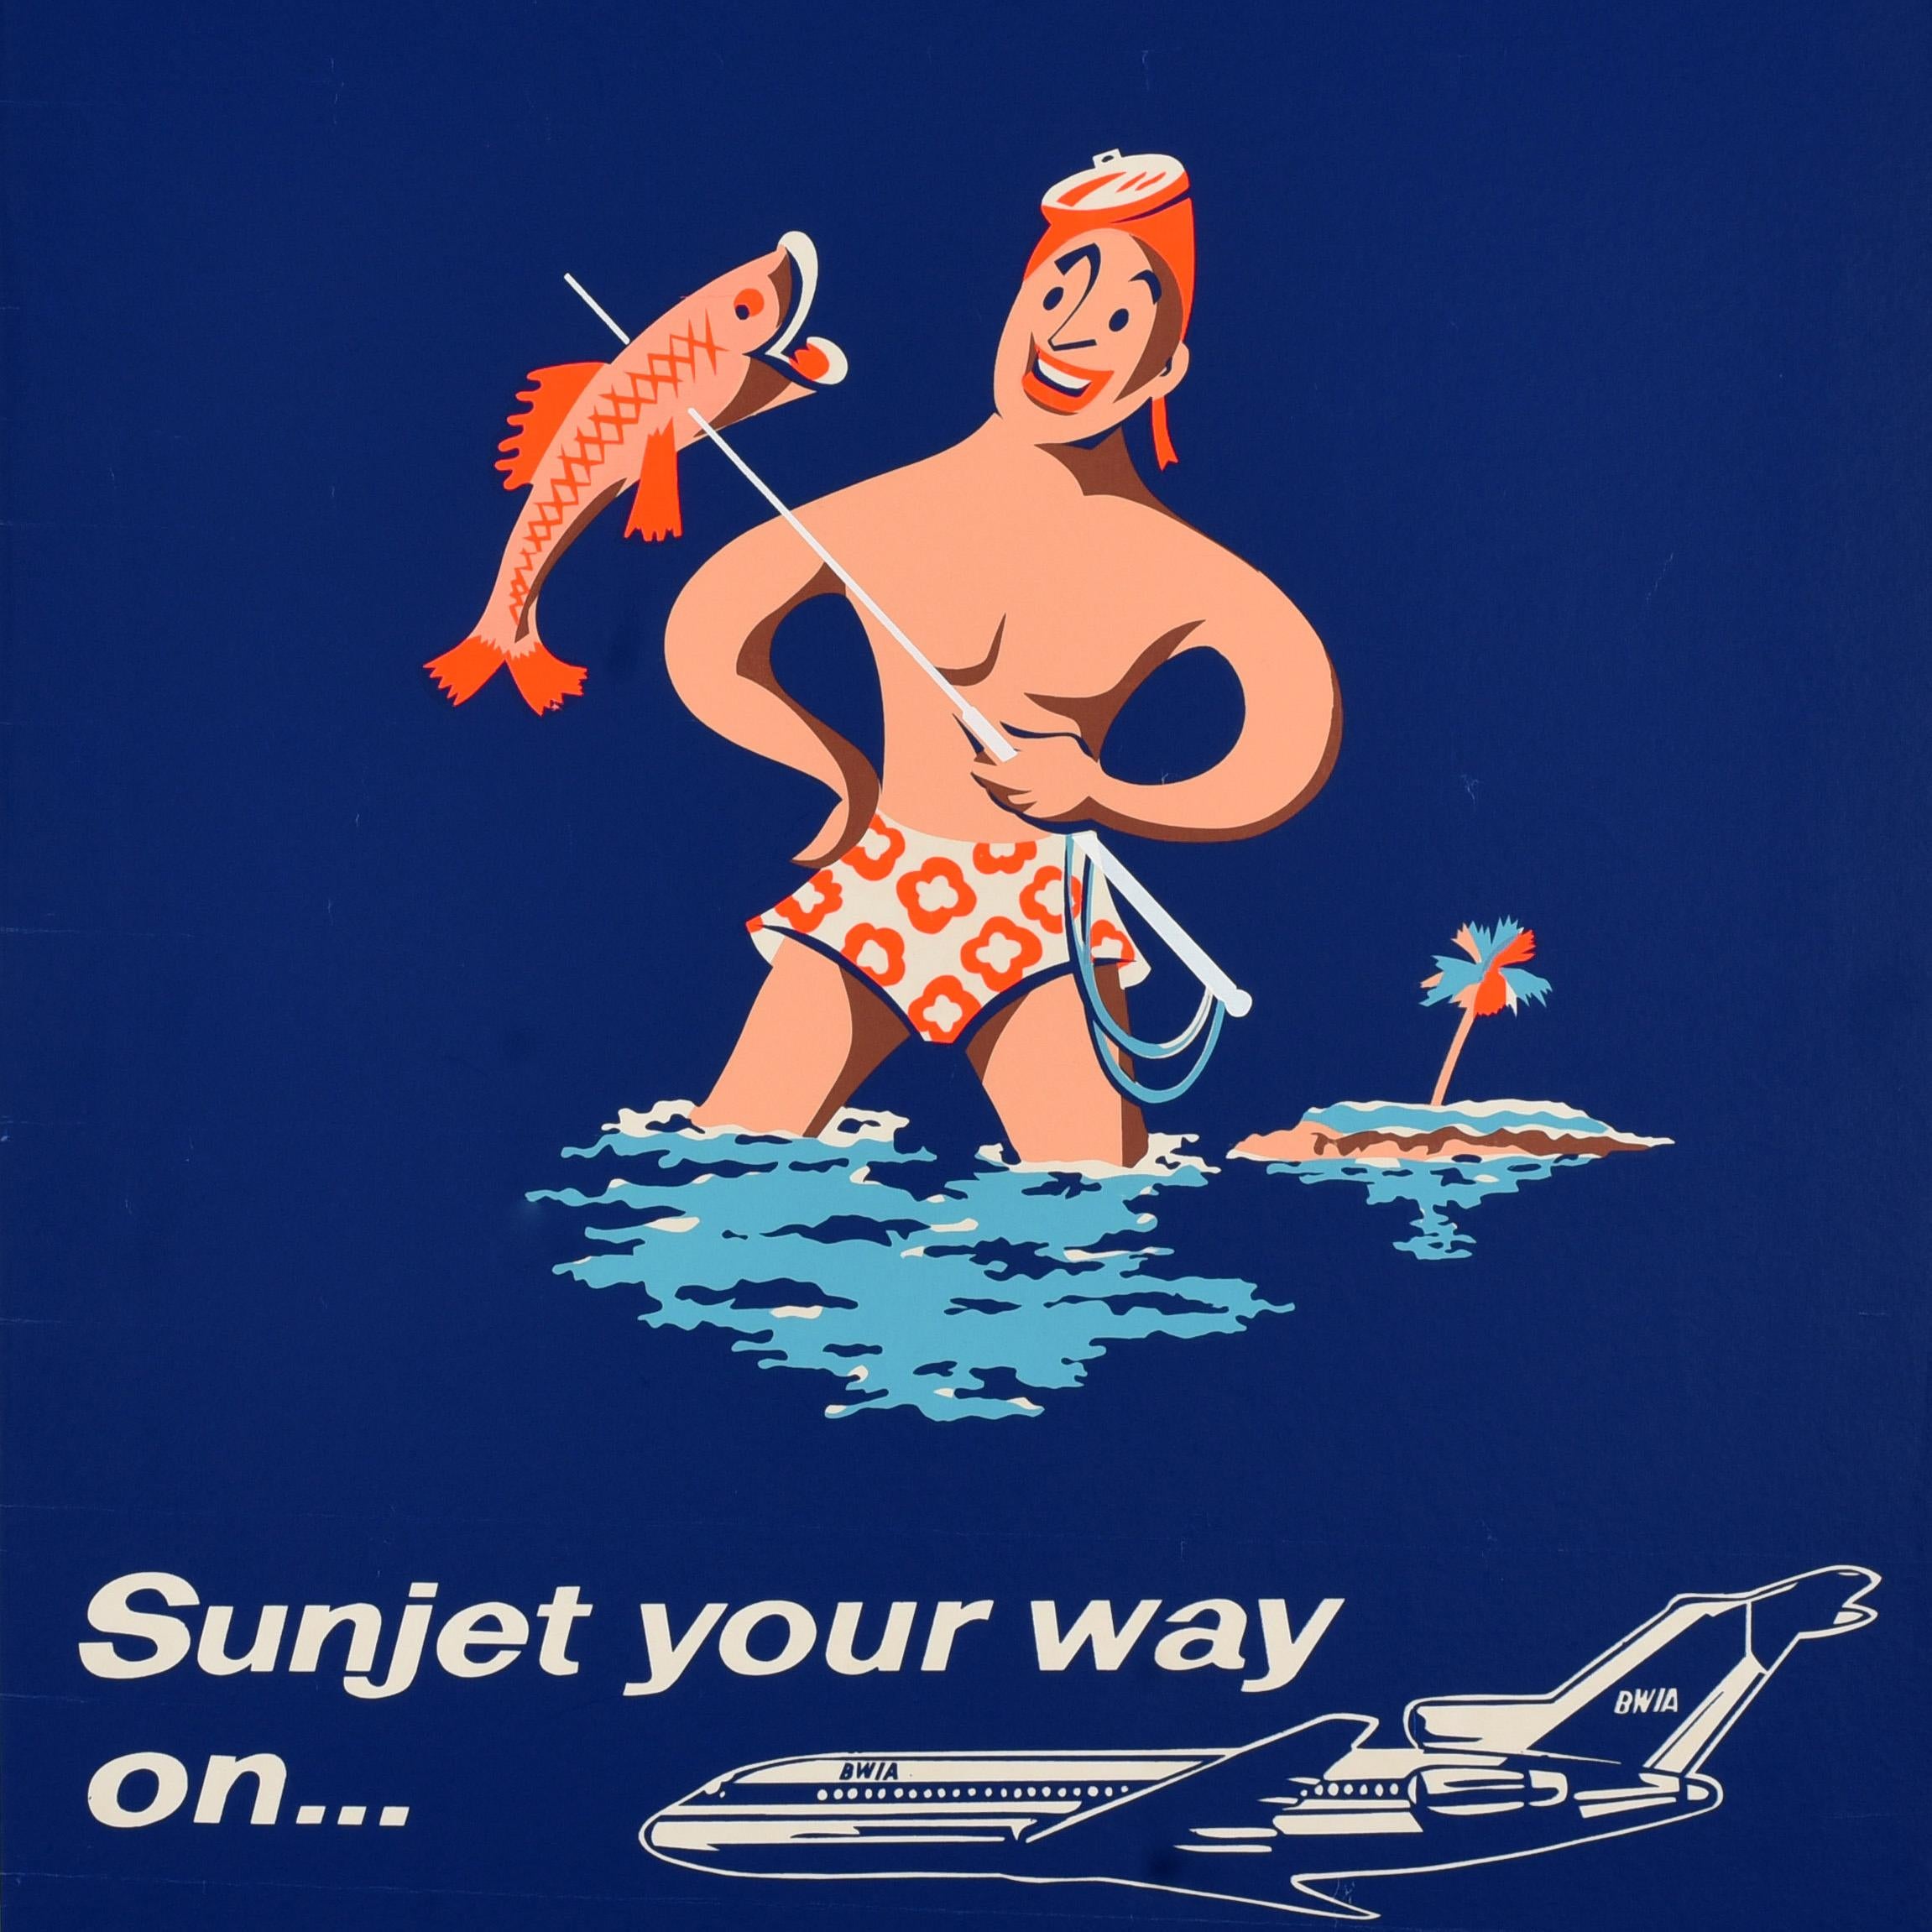 Original vintage travel poster - Antigua Sunjet your way on ... BWIA - featuring a fishing design depicting a smiling man wearing floral patterned swimming trunks and a mask on his head, holding a spear with a fish on it in front of a palm tree on